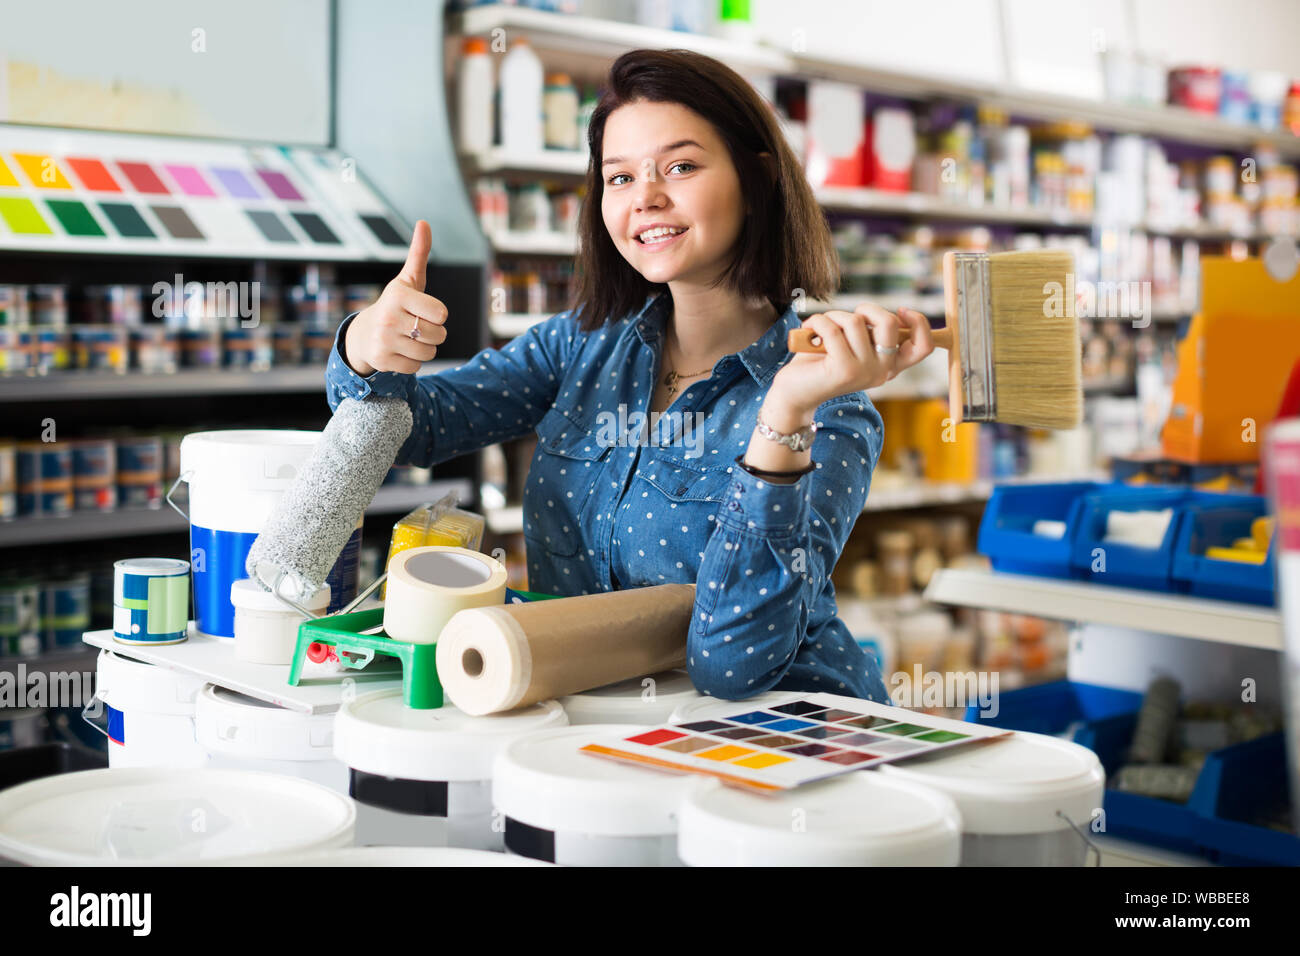 Woman 20-24 years old is purchasing tools for house improvements in paint supplies store. Stock Photo